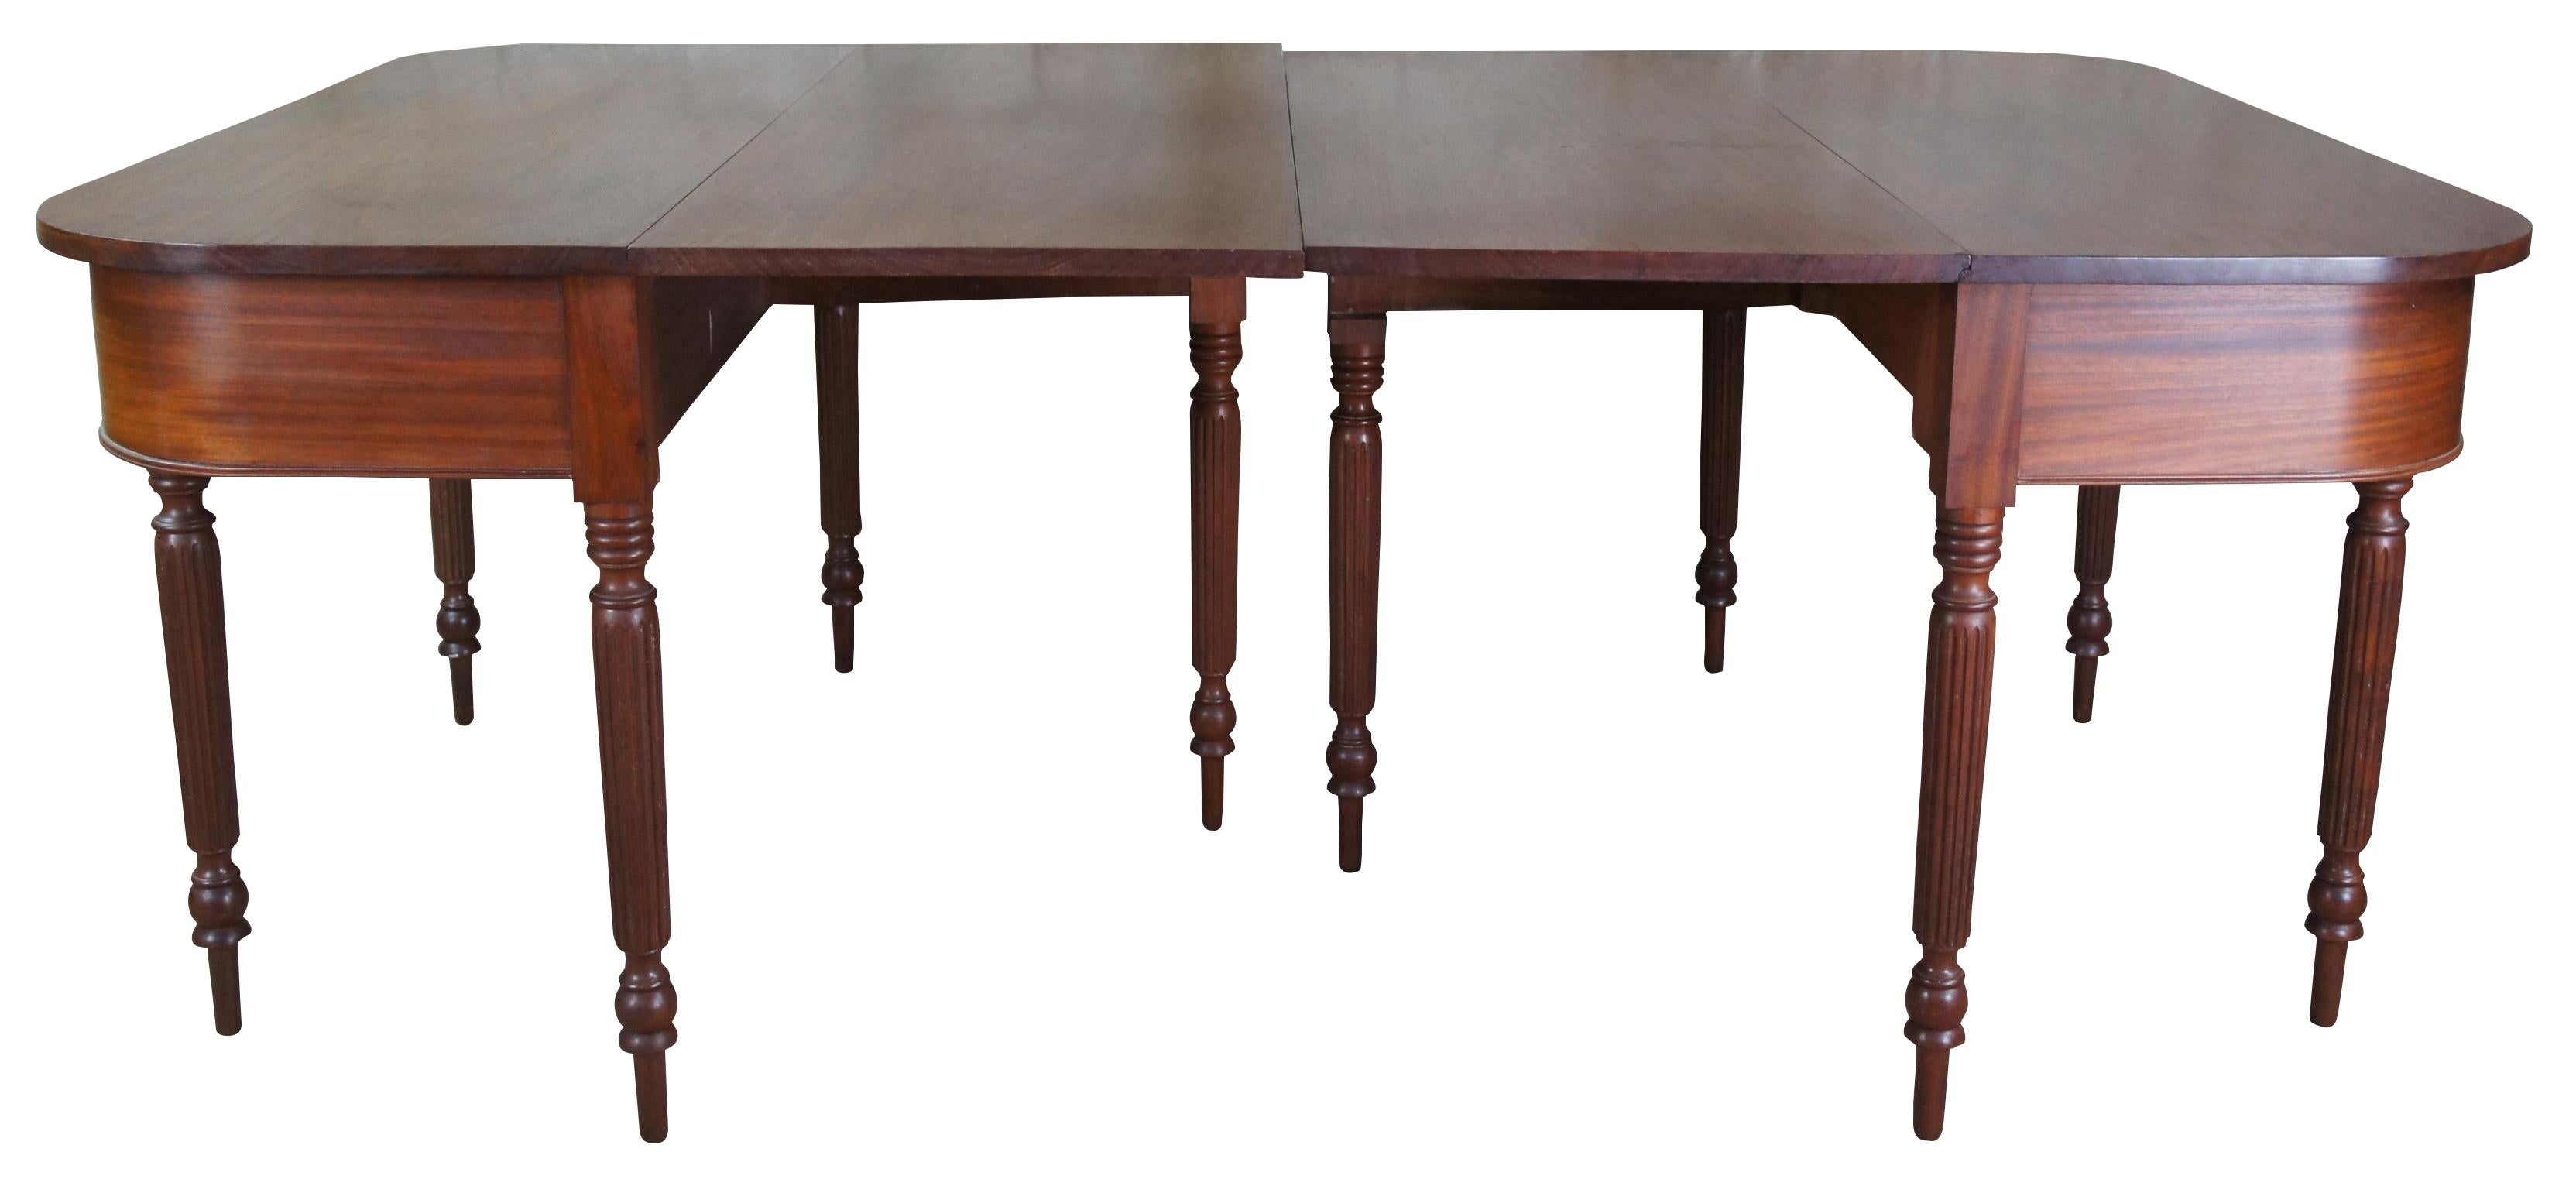 Early 19th Century 2 Antique 19th C. Sheraton Mahogany D End Dining Tables Banquet Demilune Console